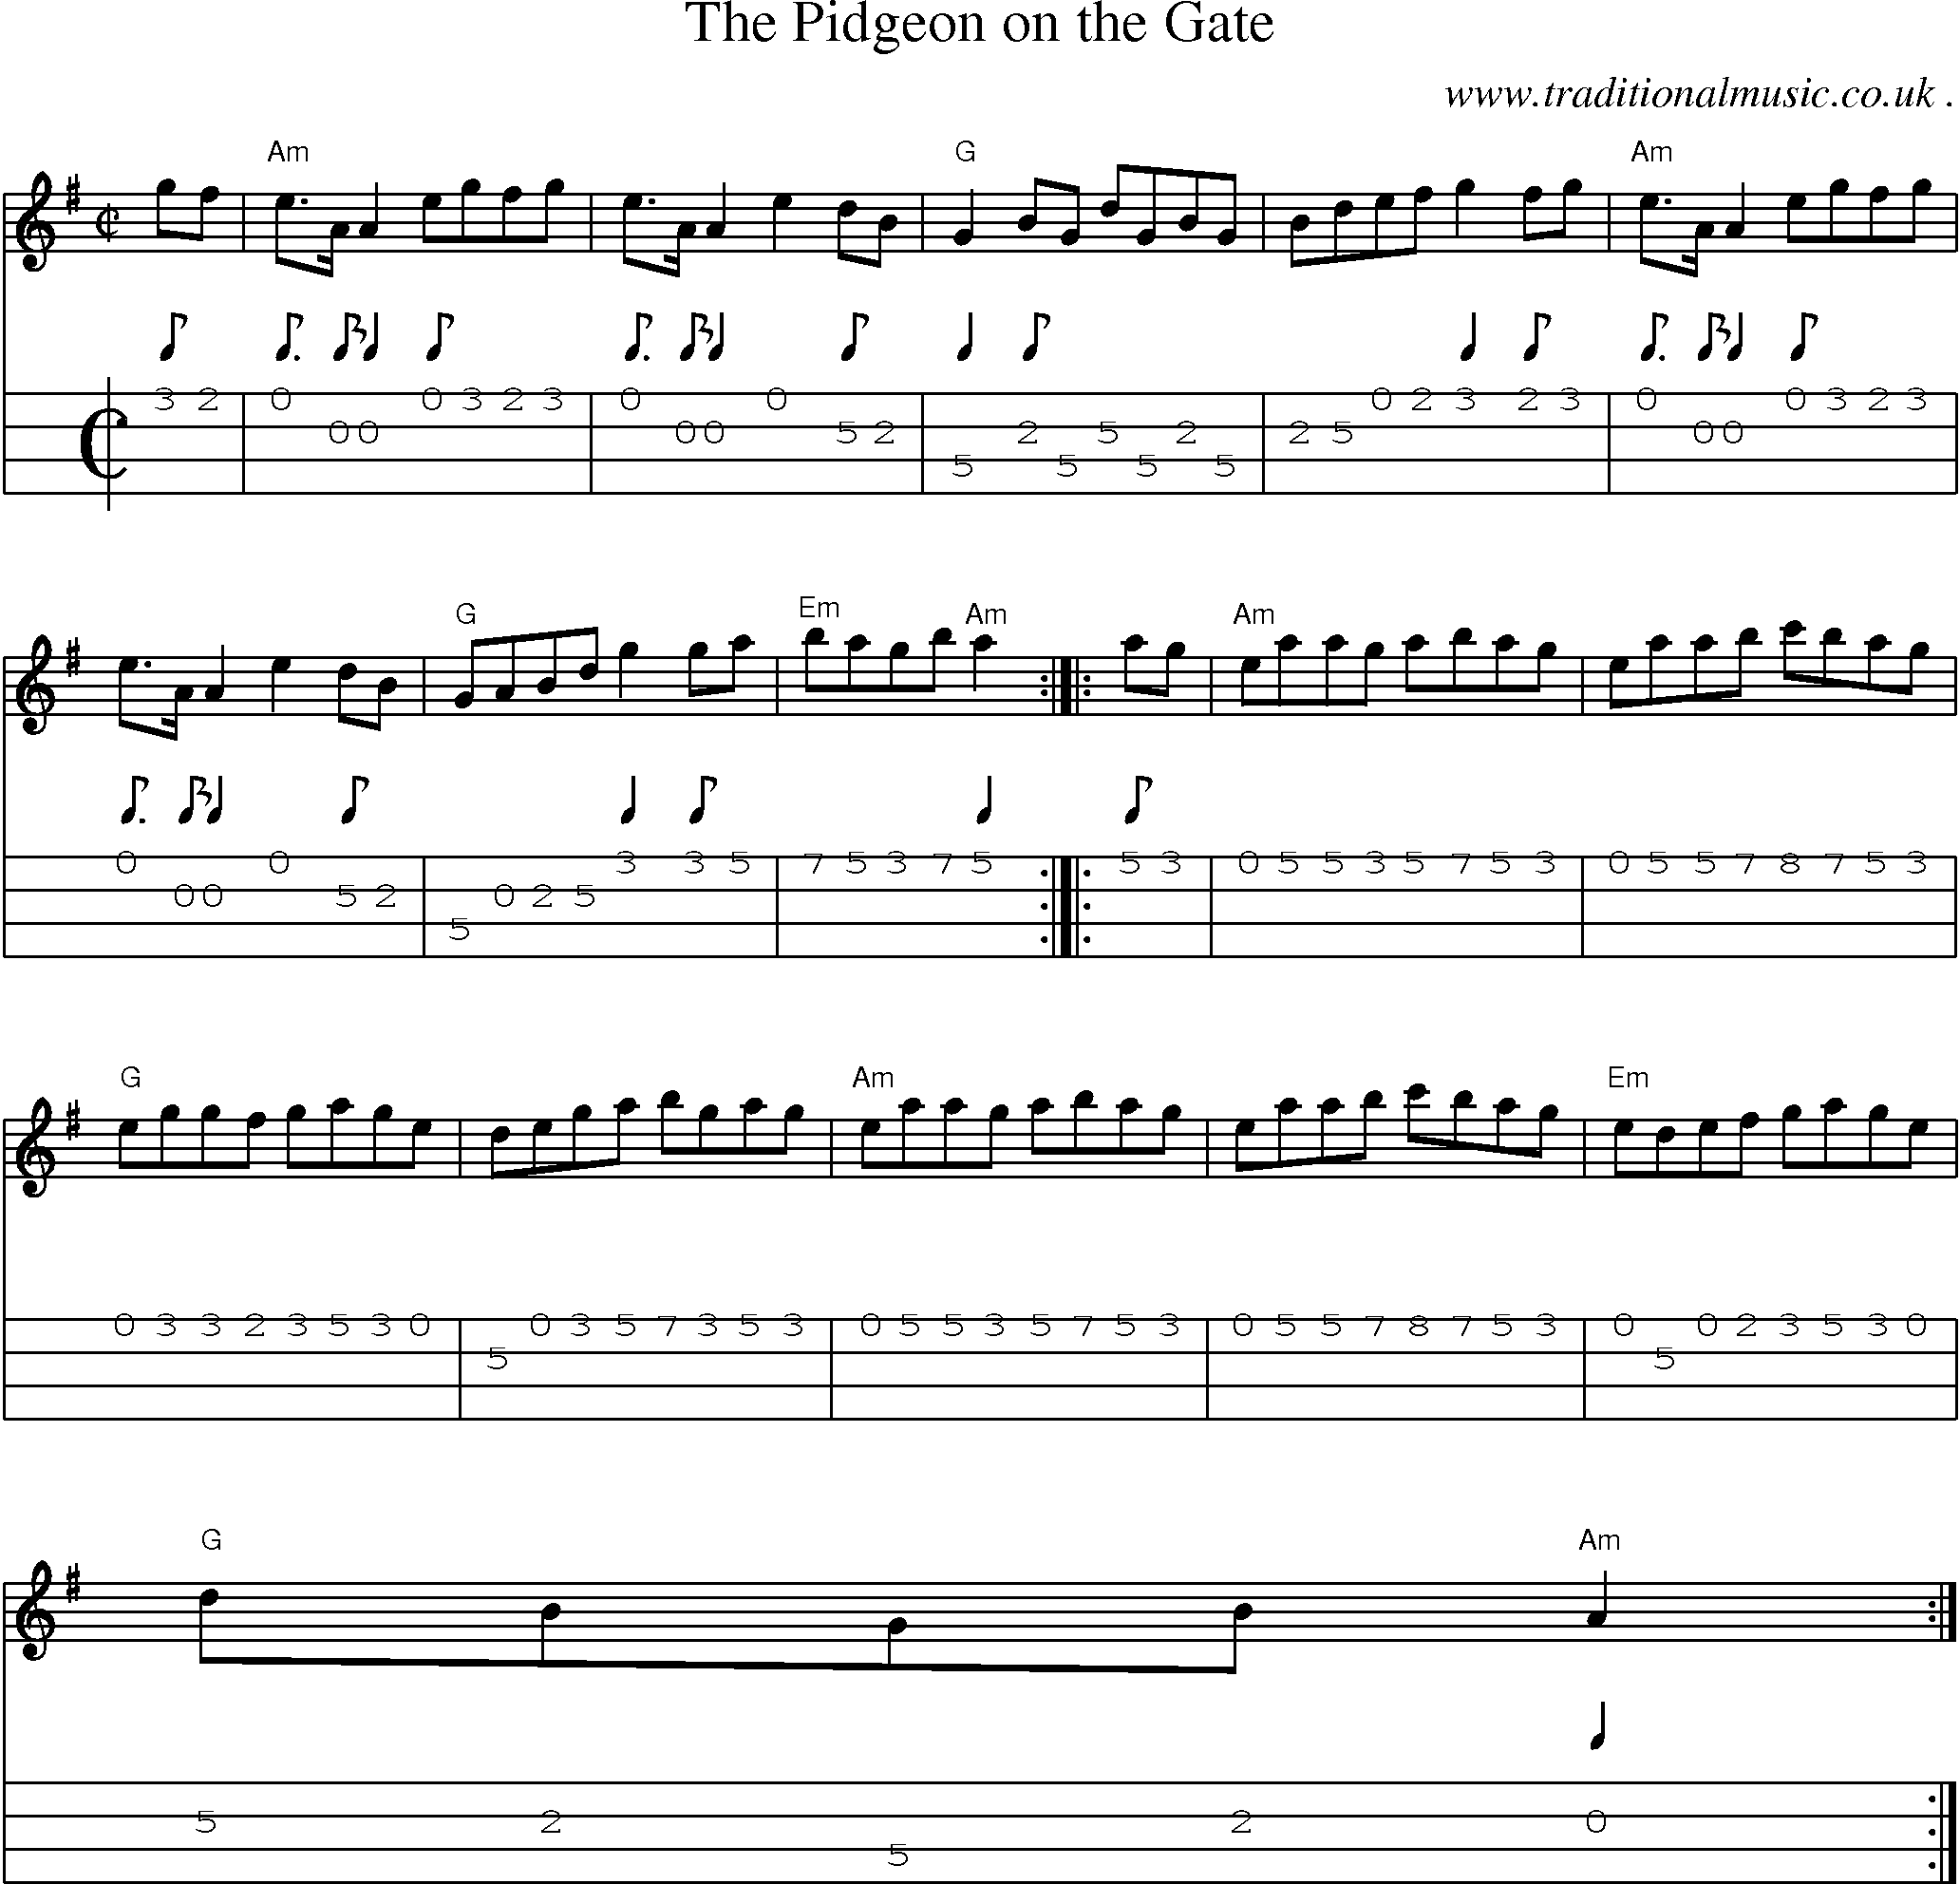 Music Score and Guitar Tabs for The Pidgeon On The Gate